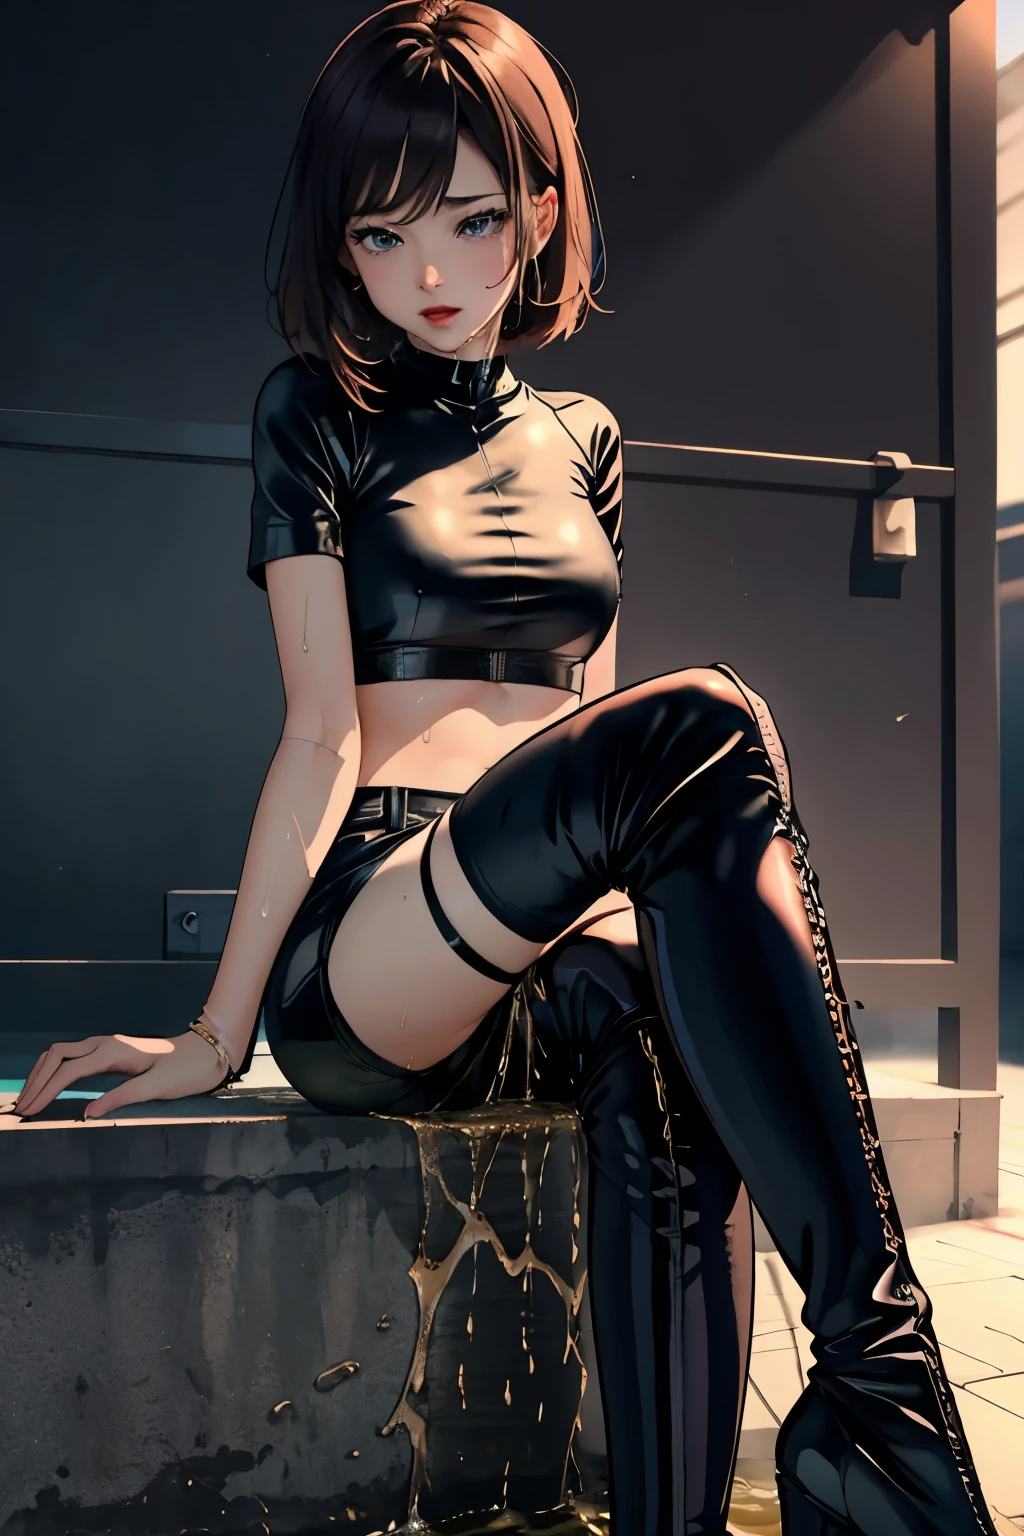 anime, best quality, high quality, highres, beautiful women, high detail, good lighting, lewd, hentai, (no nudity), ((((bike shorts)))), ((tight leather top)), ((((leather thigh high boots)))), bare midriff, (wet shorts), (((wetting herself))), (((peeing herself))), (((peeing self))), (pee streaming down legs), peeing stain, (puddle), (thick thighs), nice long legs, lipstick, detailed face, pretty face, pretty hands, embarrassed blushing face, humiliated, ((sitting legs crossed)), hihelz